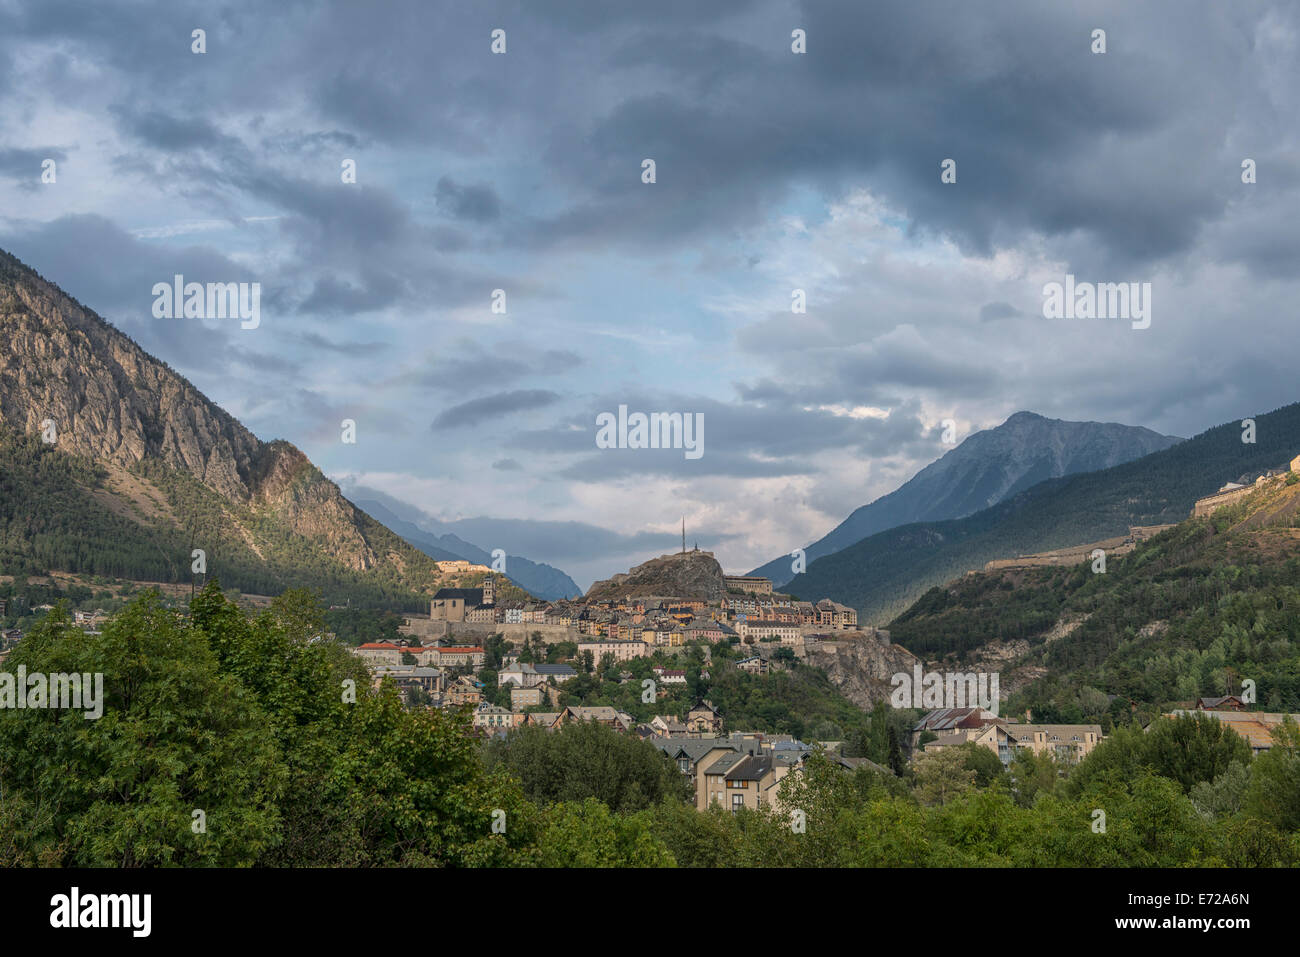 The town of Briancon on a cloudy day, after a storm, Briancon, Provence, France Stock Photo